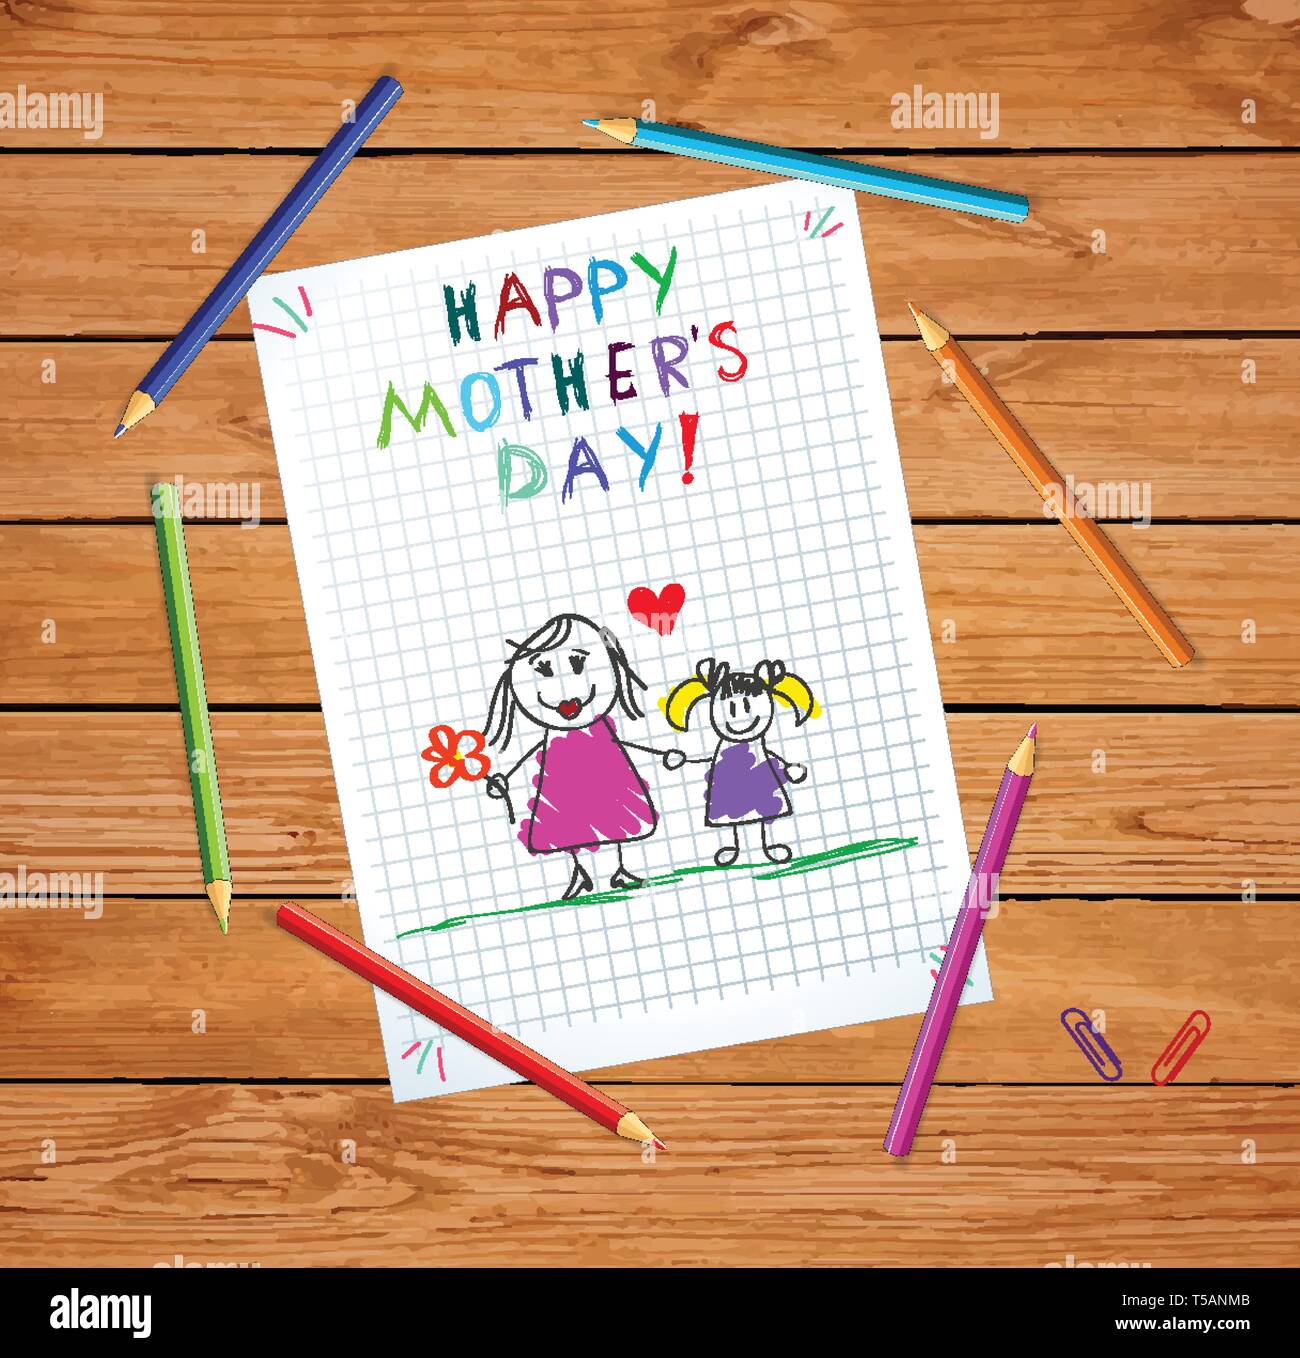 Happy Mothers Day Baby Hand Drawn Illustration of Mother Hold Hands with Daughter on Checked Paper Sheet or Graphing Paper on Wooden Tabel with Colore Stock Vector